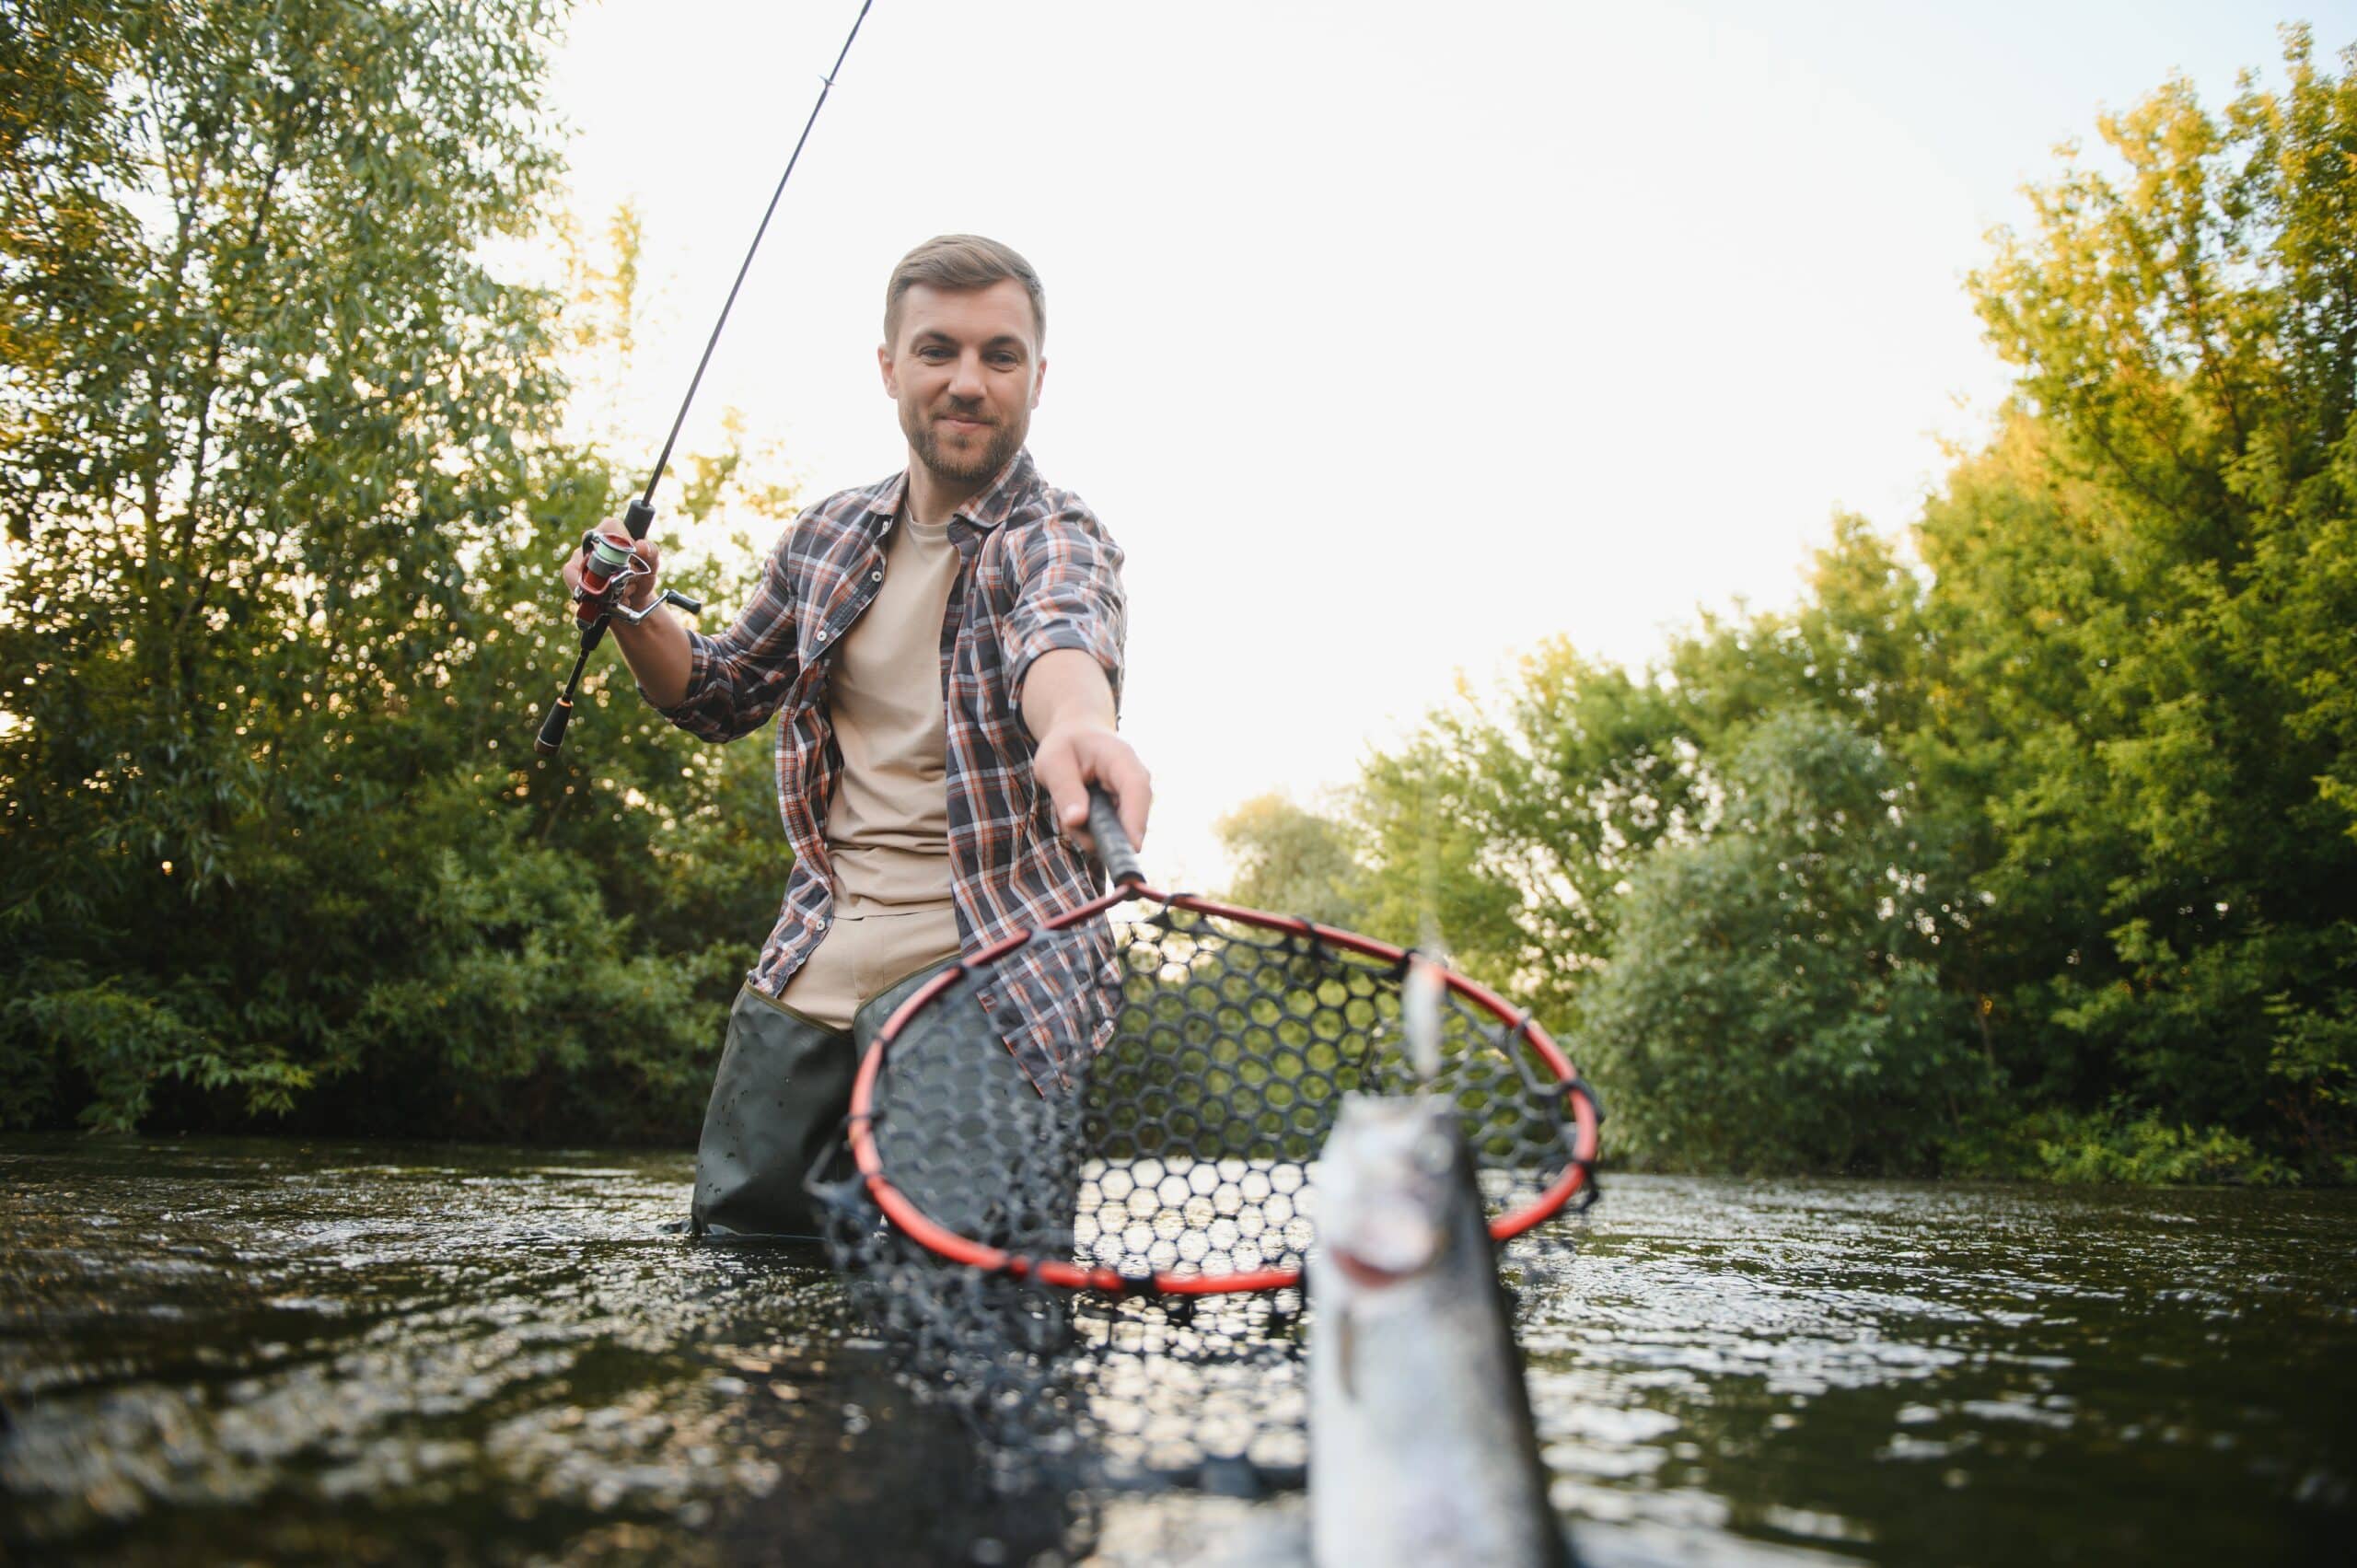 fanatic4fishing.com : What is tippet for fly fishing?